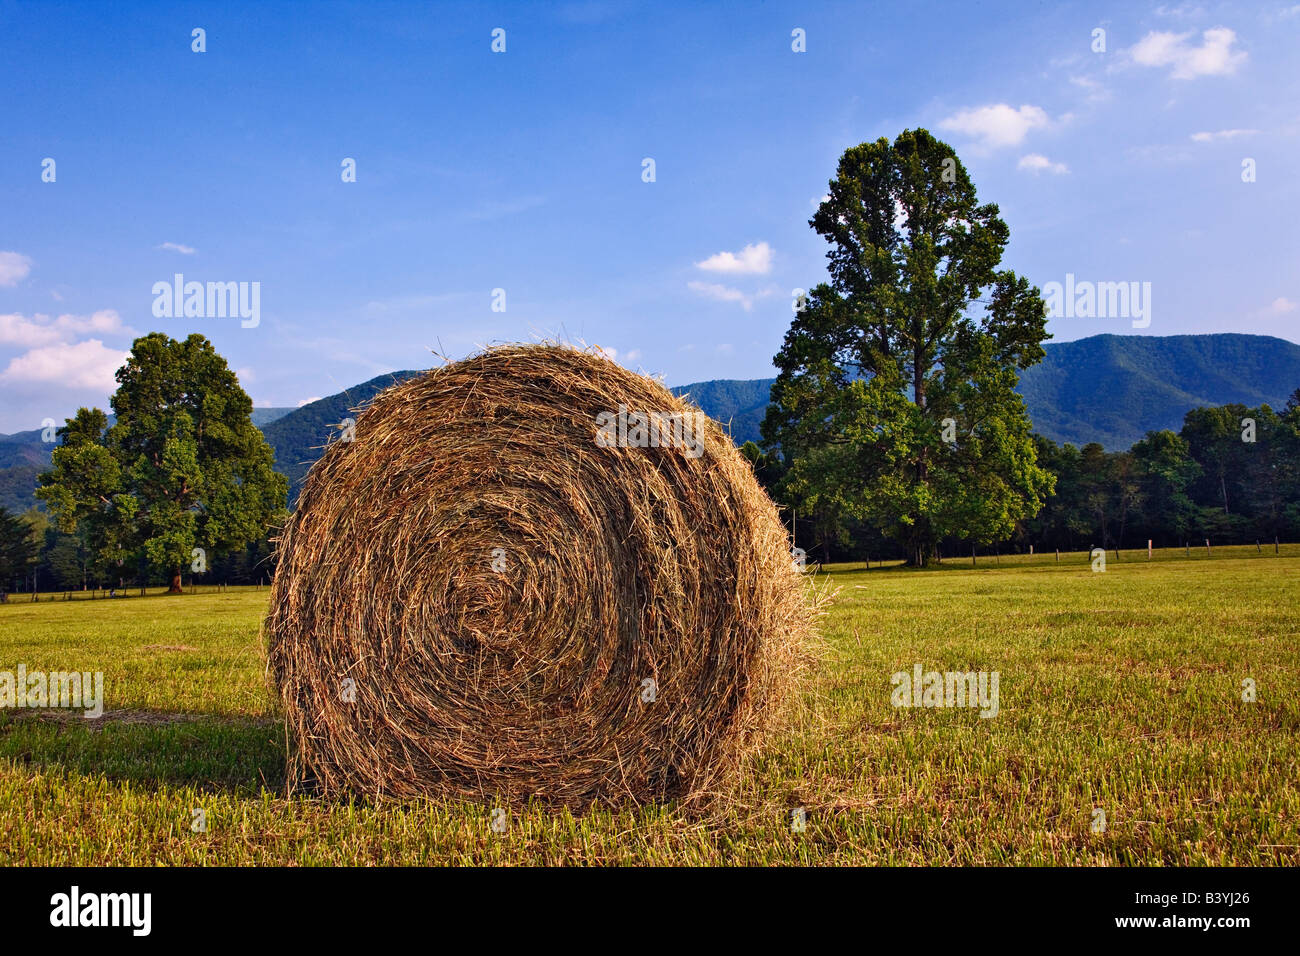 Rolled hay bale, Cades Cove, Great Smoky Mountains National Park, Tennessee Stock Photo